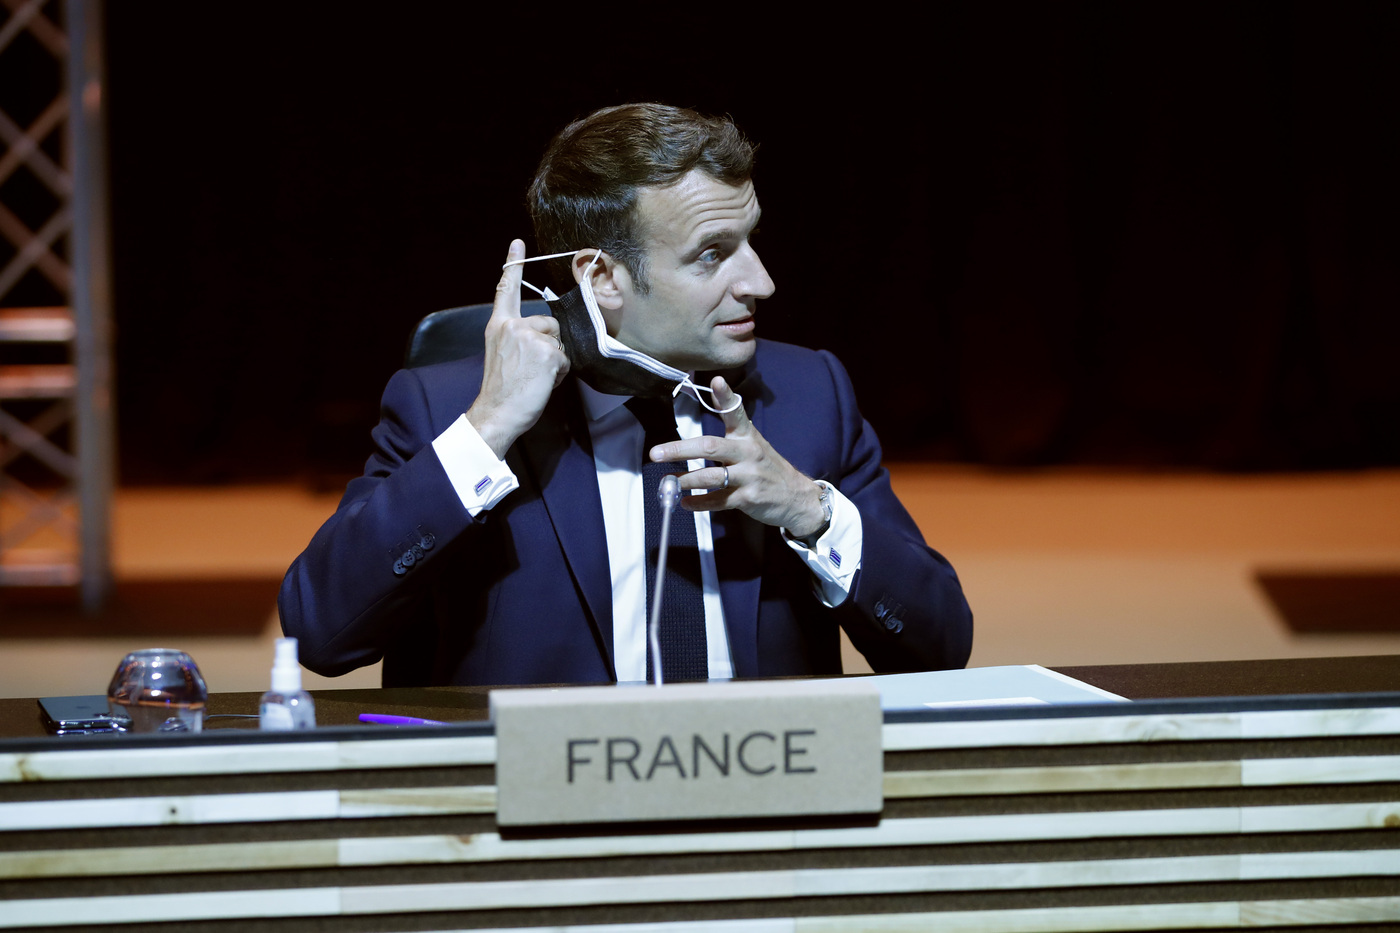 French President Emmanuel Macron during an EU summit round table meeting at the Crystal Palace in Porto, Portugal, Saturday, May 8, 2021. On Saturday, EU leaders hold an online summit with India's Prime Minister Narendra Modi, covering trade, climate change and help with India's COVID-19 surge. (AP Photo/Francisco Seco, Pool)